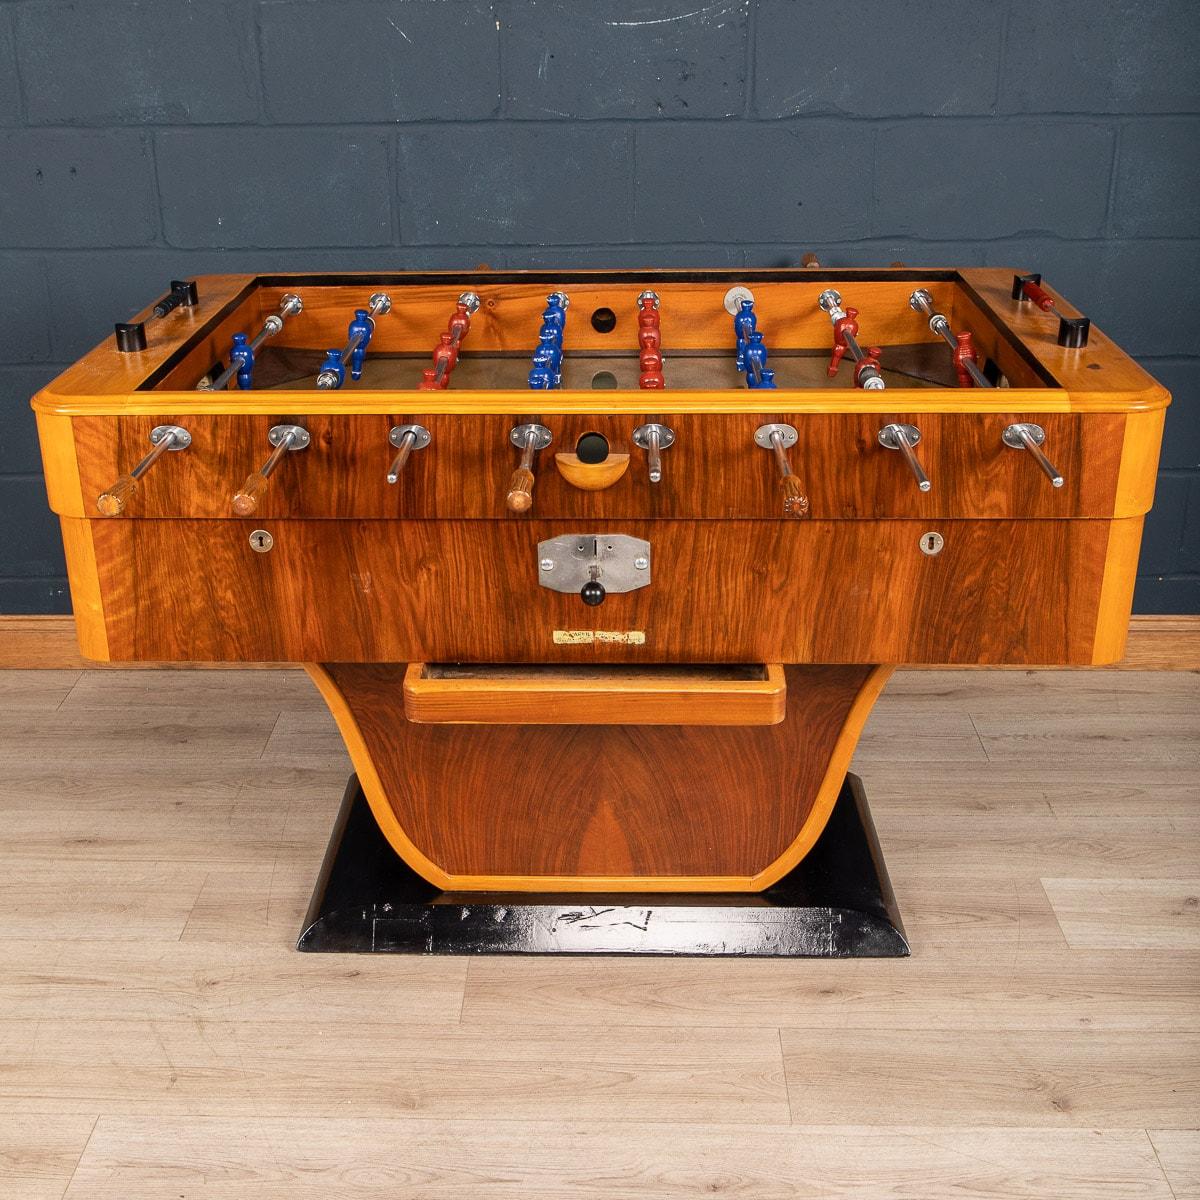 20th Century Italian Art Deco Football Table Game In Good Condition For Sale In Royal Tunbridge Wells, Kent